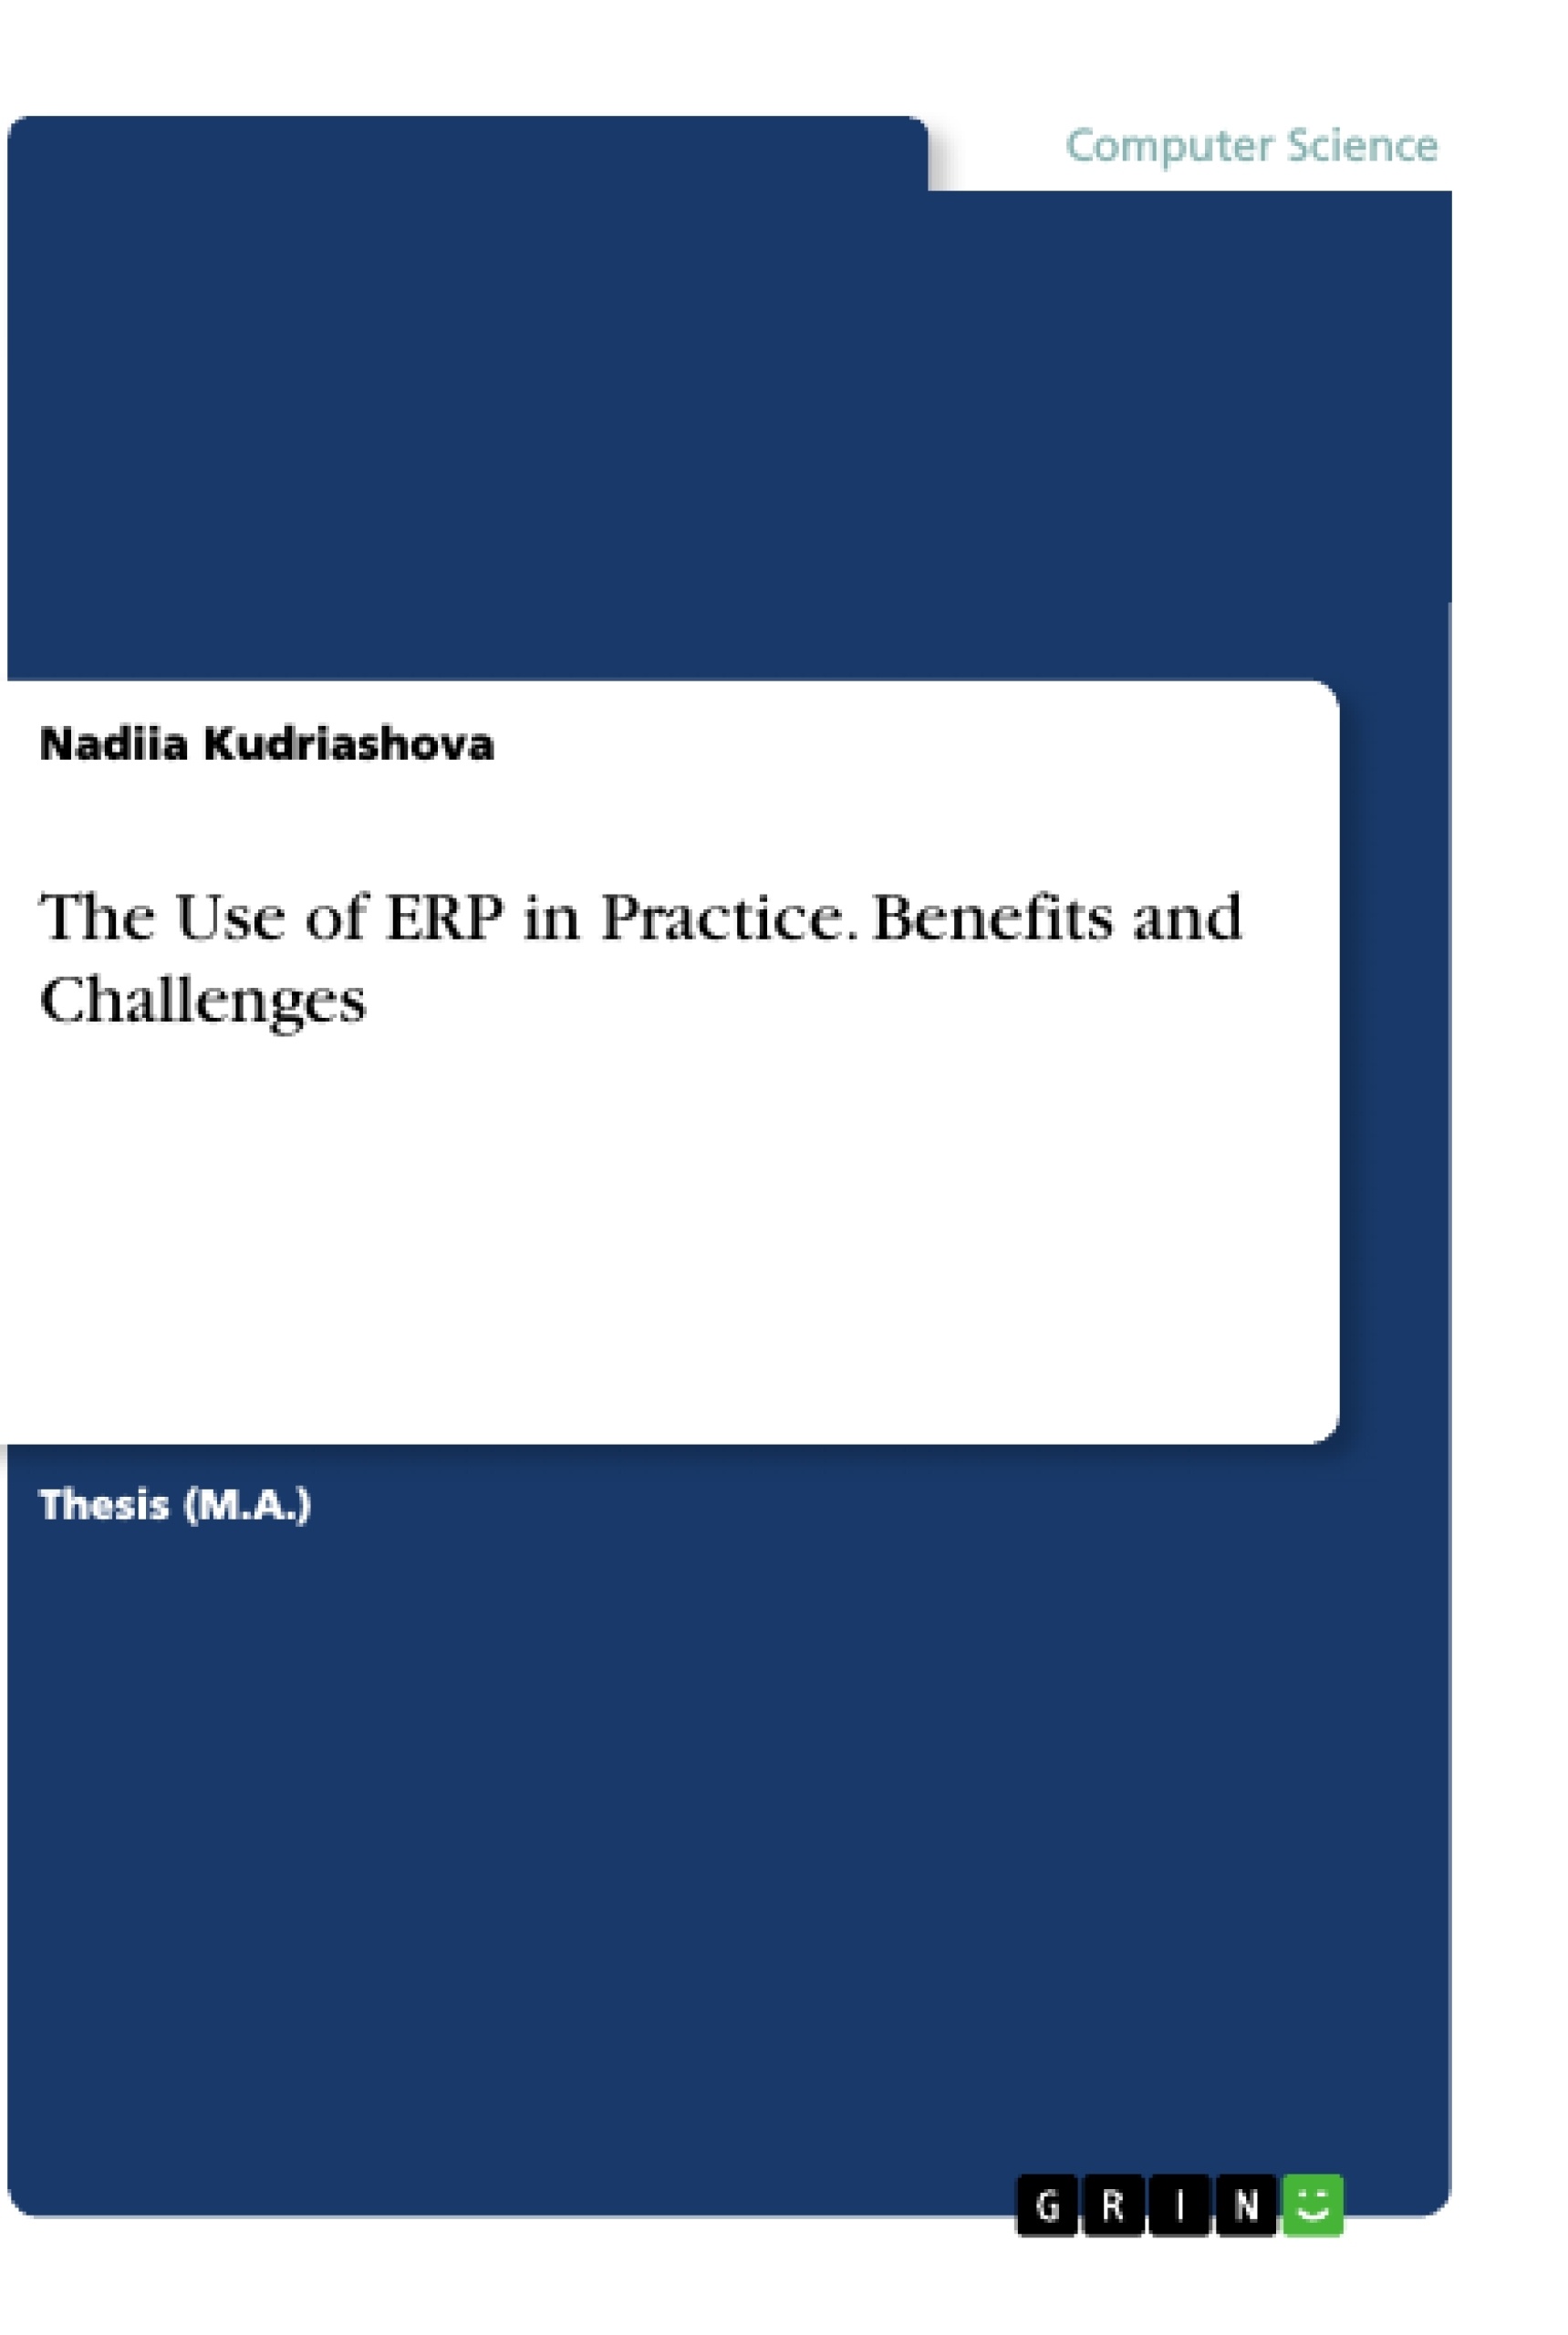 Título: The Use of ERP in Practice. Benefits and Challenges